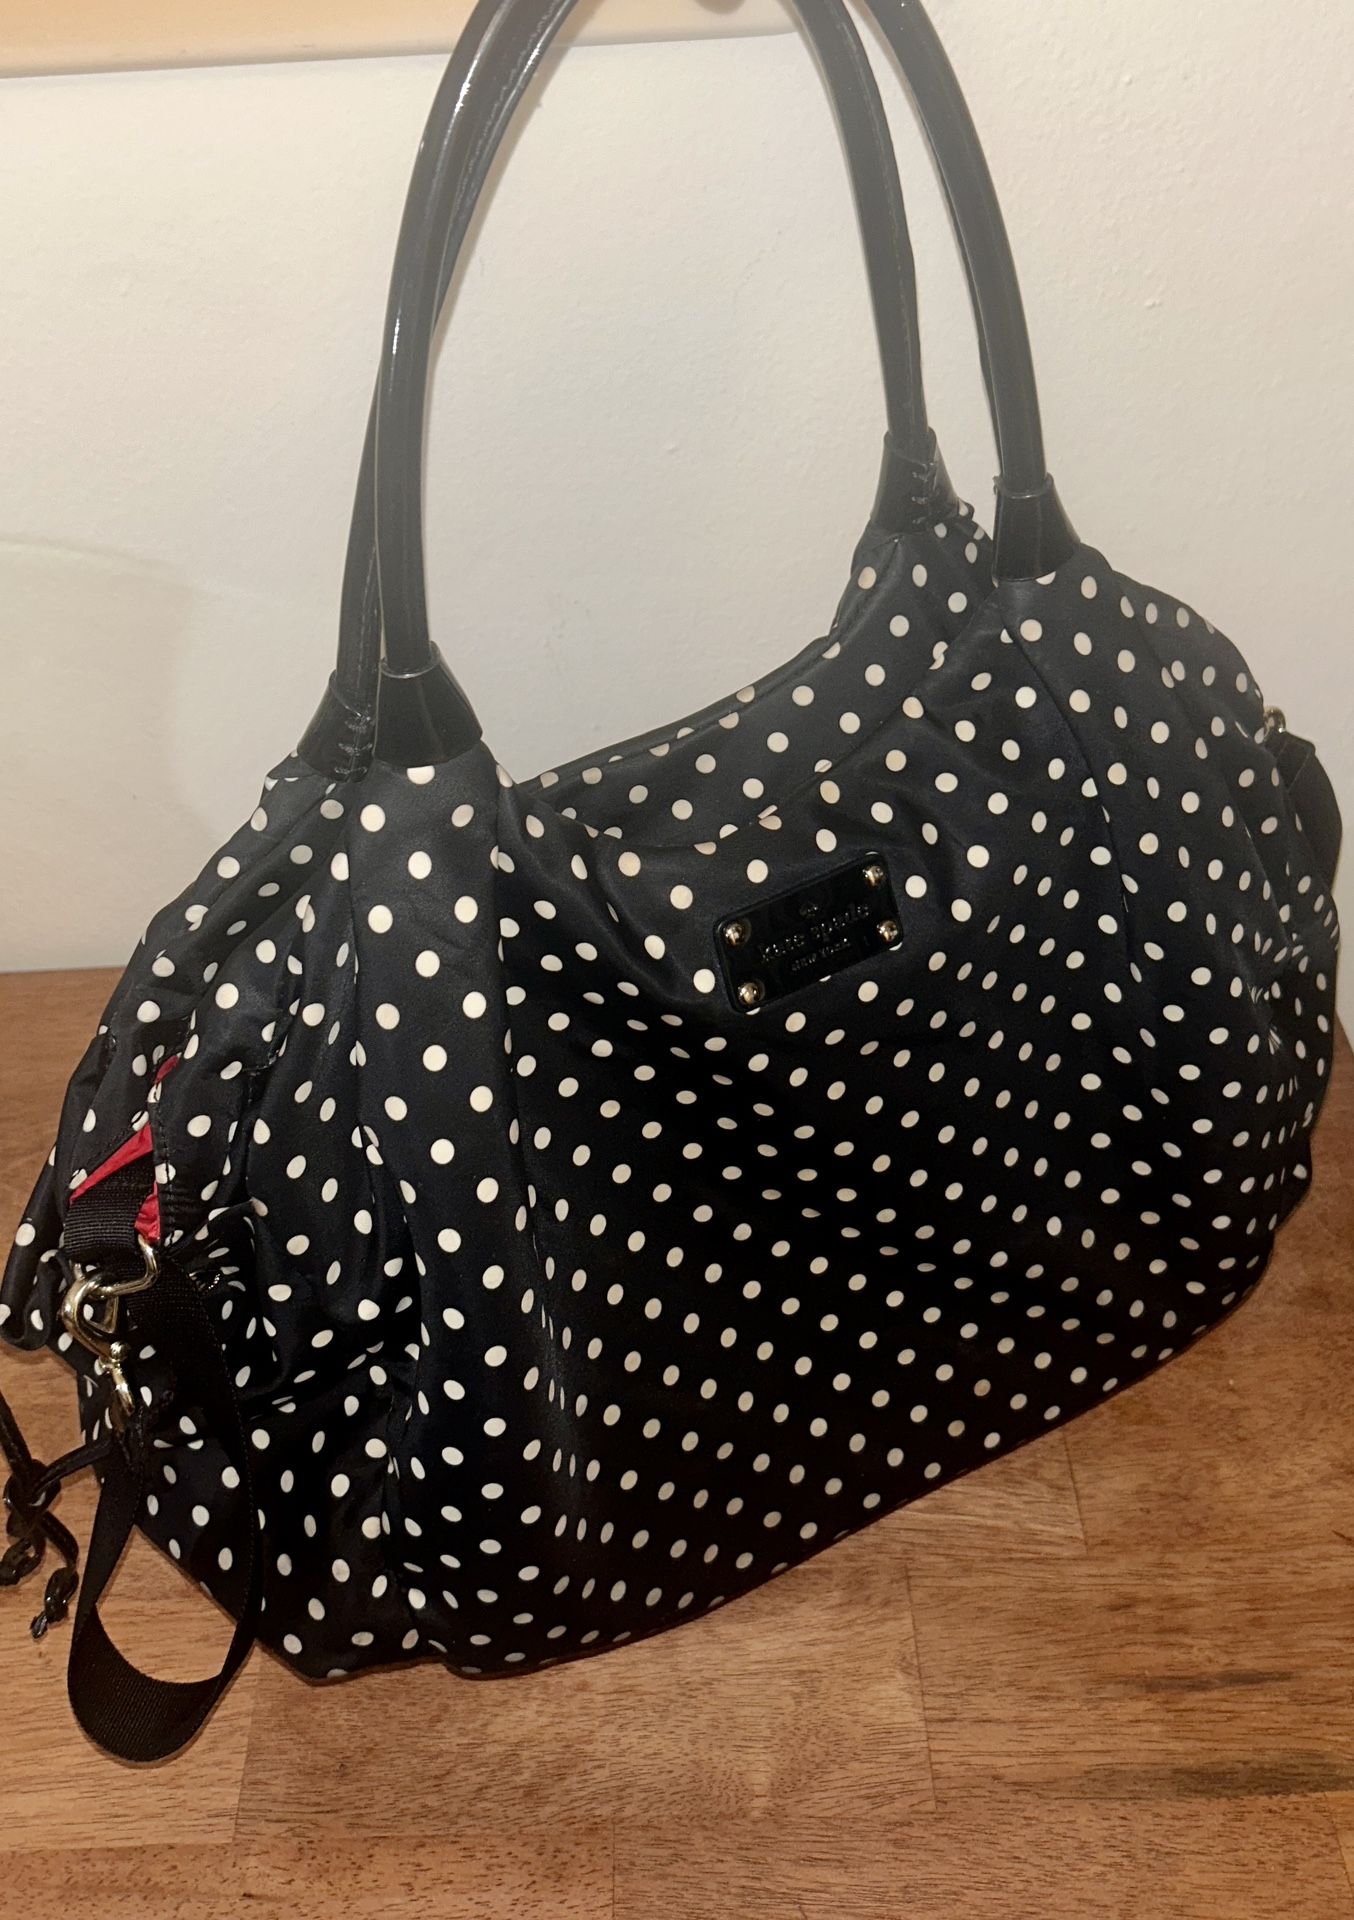 Kate Spade Polka-dot Travel Tote Or Diaper Baby Bag for Sale in Fort  Lauderdale, FL - OfferUp